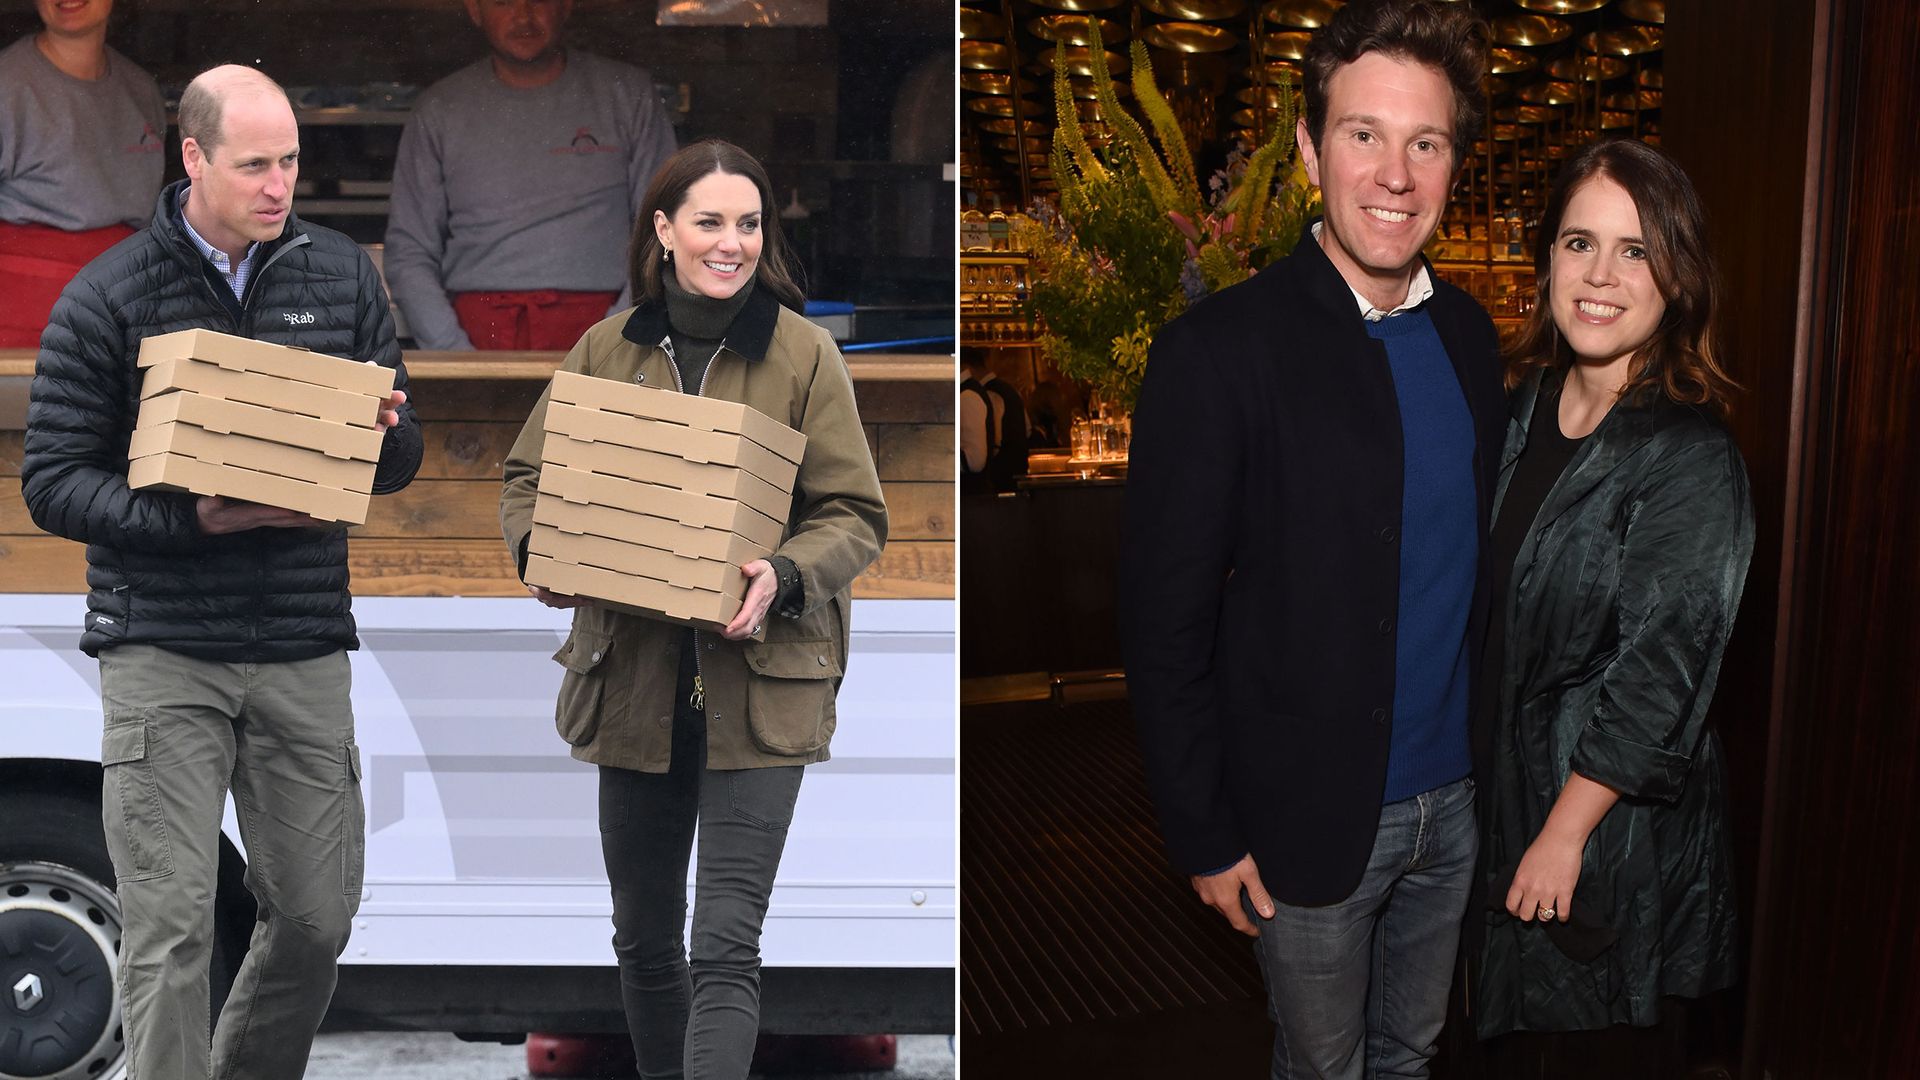 Split of William and Kate with pizzas and Princess Eugenie and Jack Brooksbank